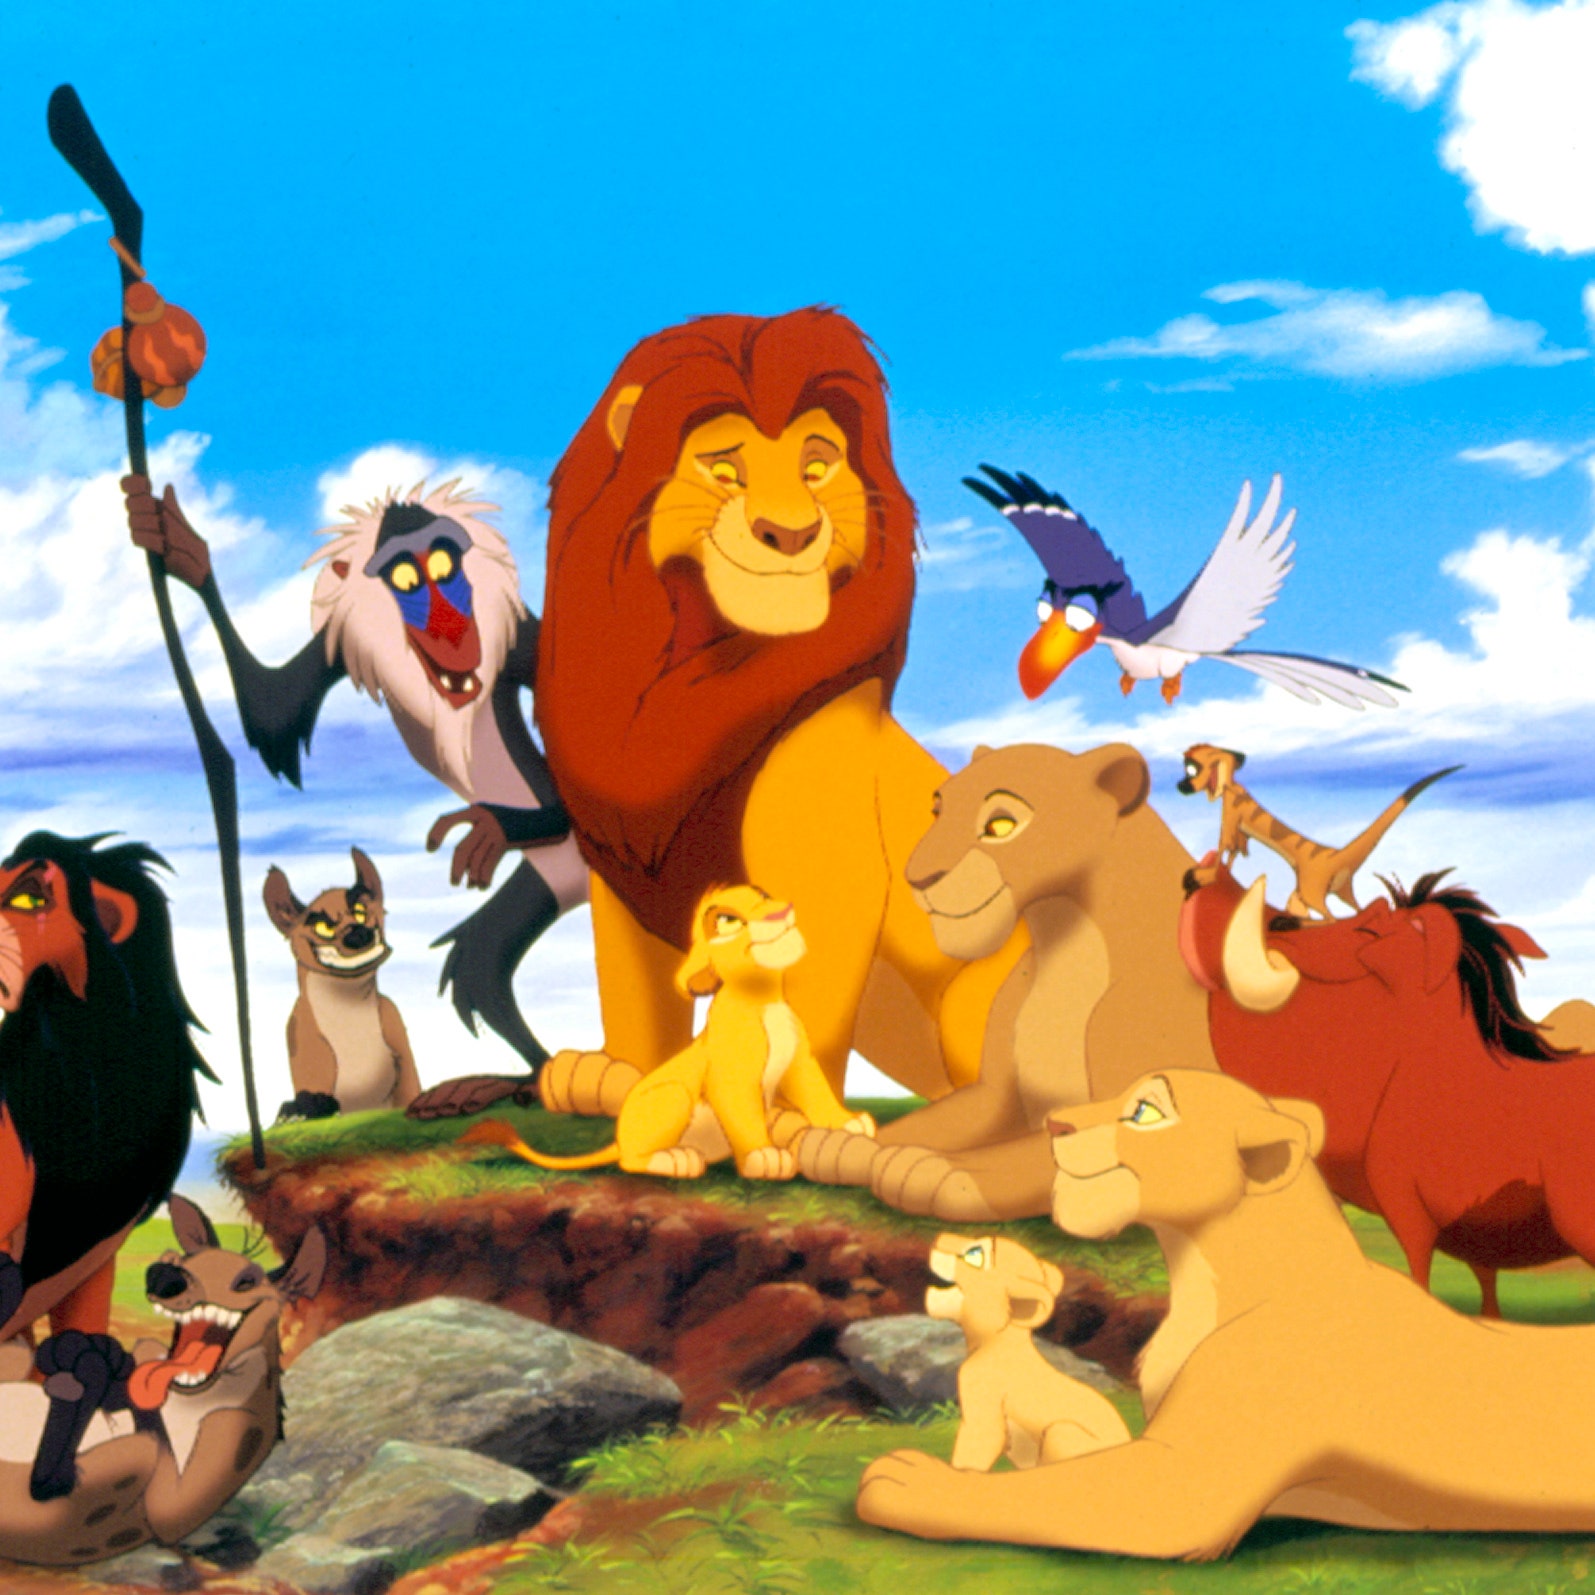 The Lion King, Hand Drawn Animation, And The Problem With Photo Realism